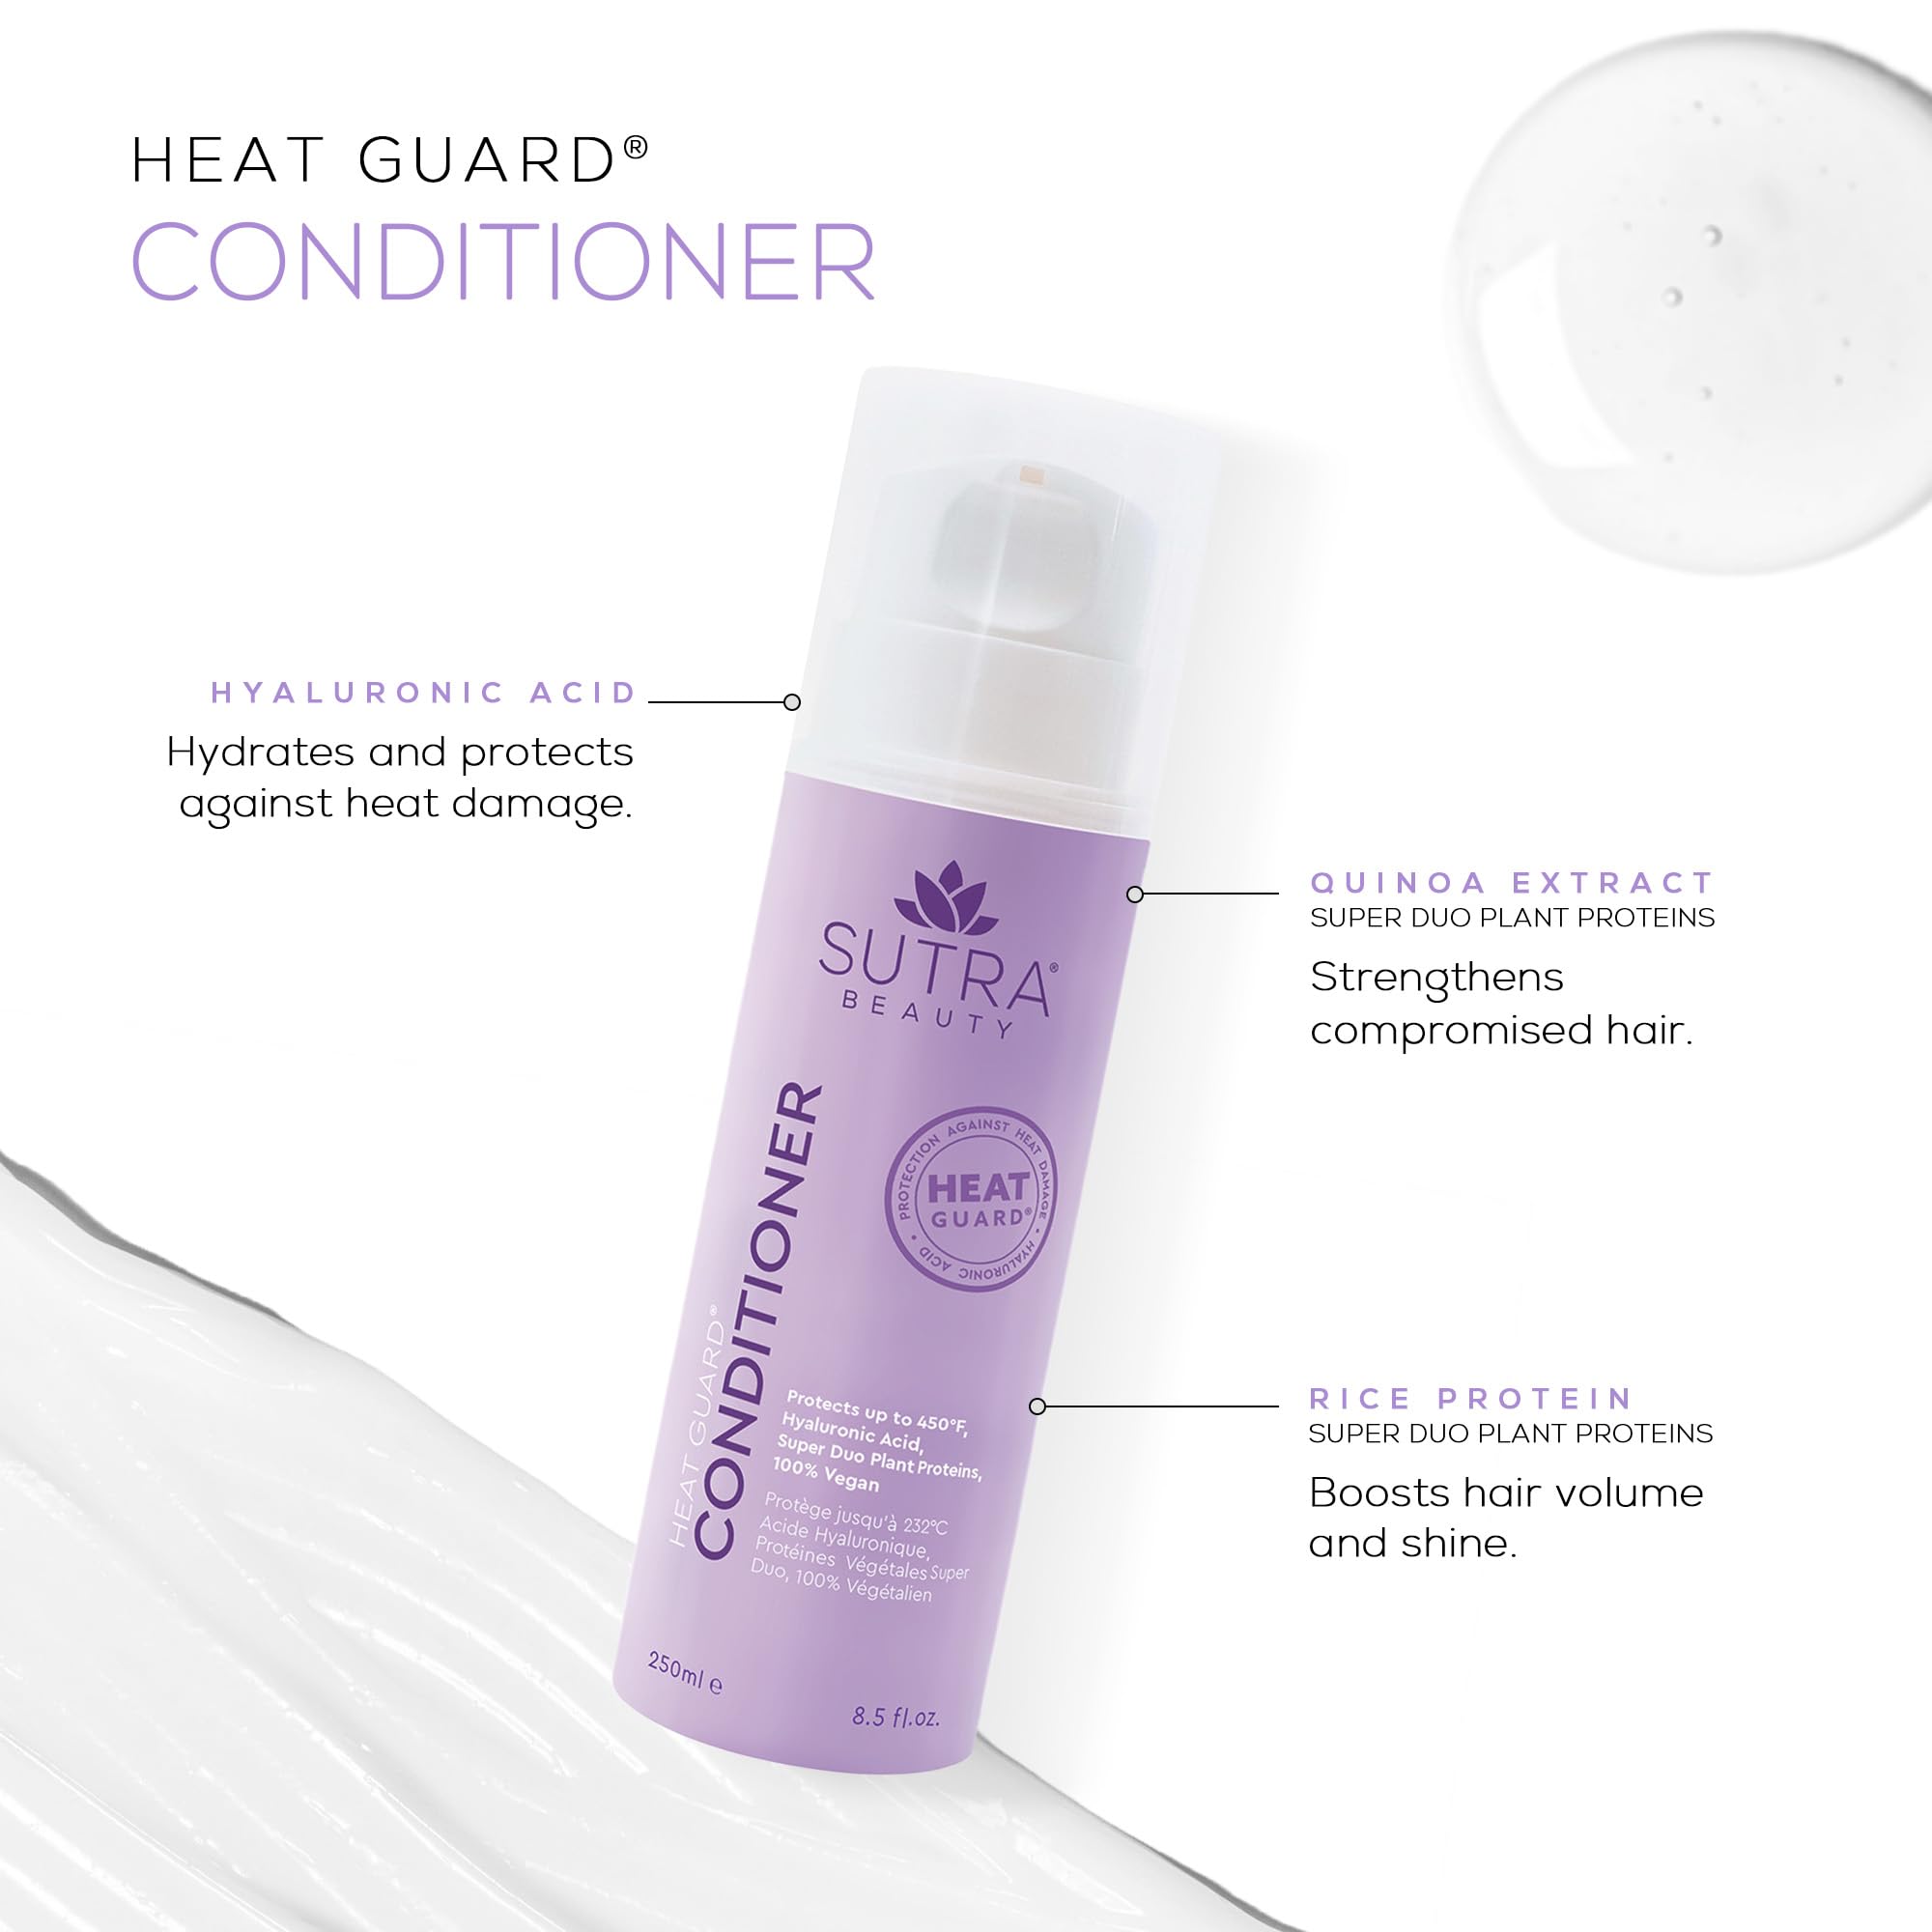 SUTRA Heat Guard® Conditioner - Hydrating, Detangling Power and Hyaluronic Acid Infusion for Ultimate Hair Protection, Moisture Restoration, and Effortless Styling